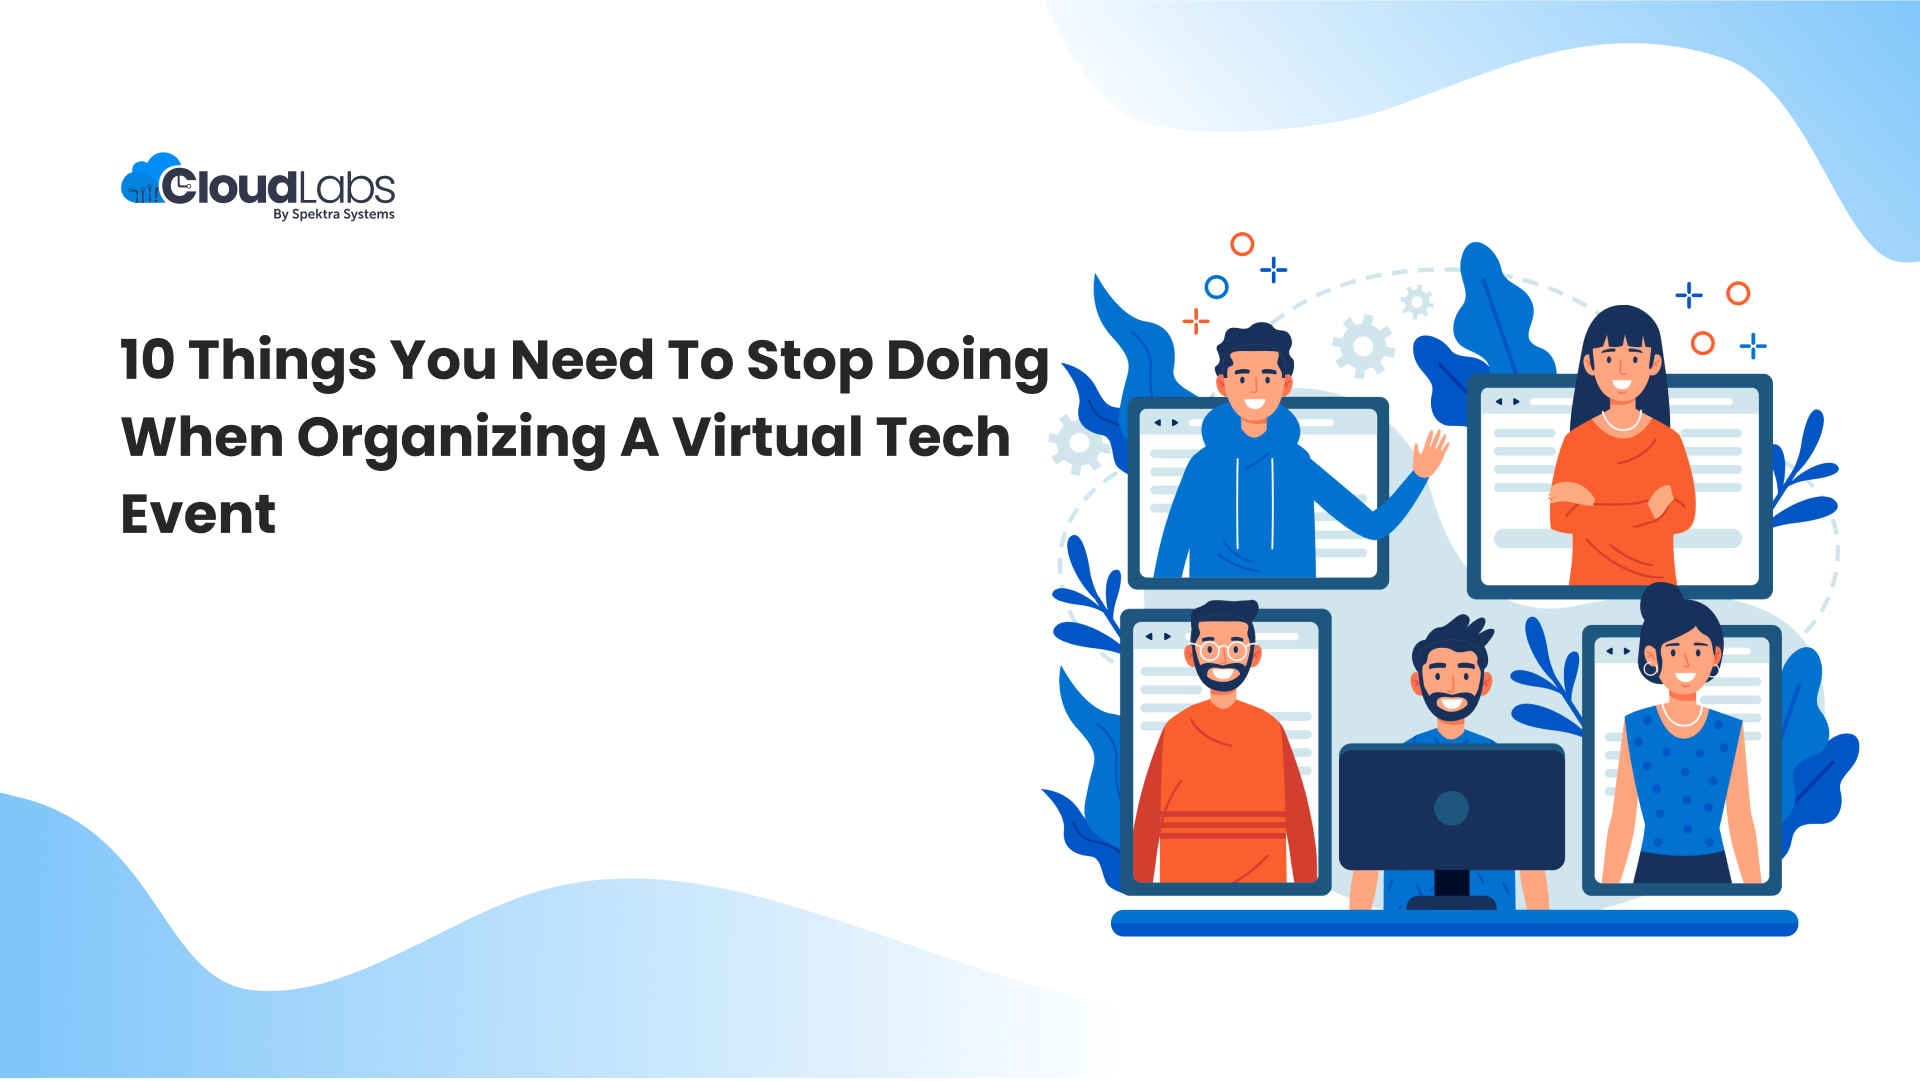 10 Things You Need to Stop Doing if You are Organizing a Virtual Tech Event